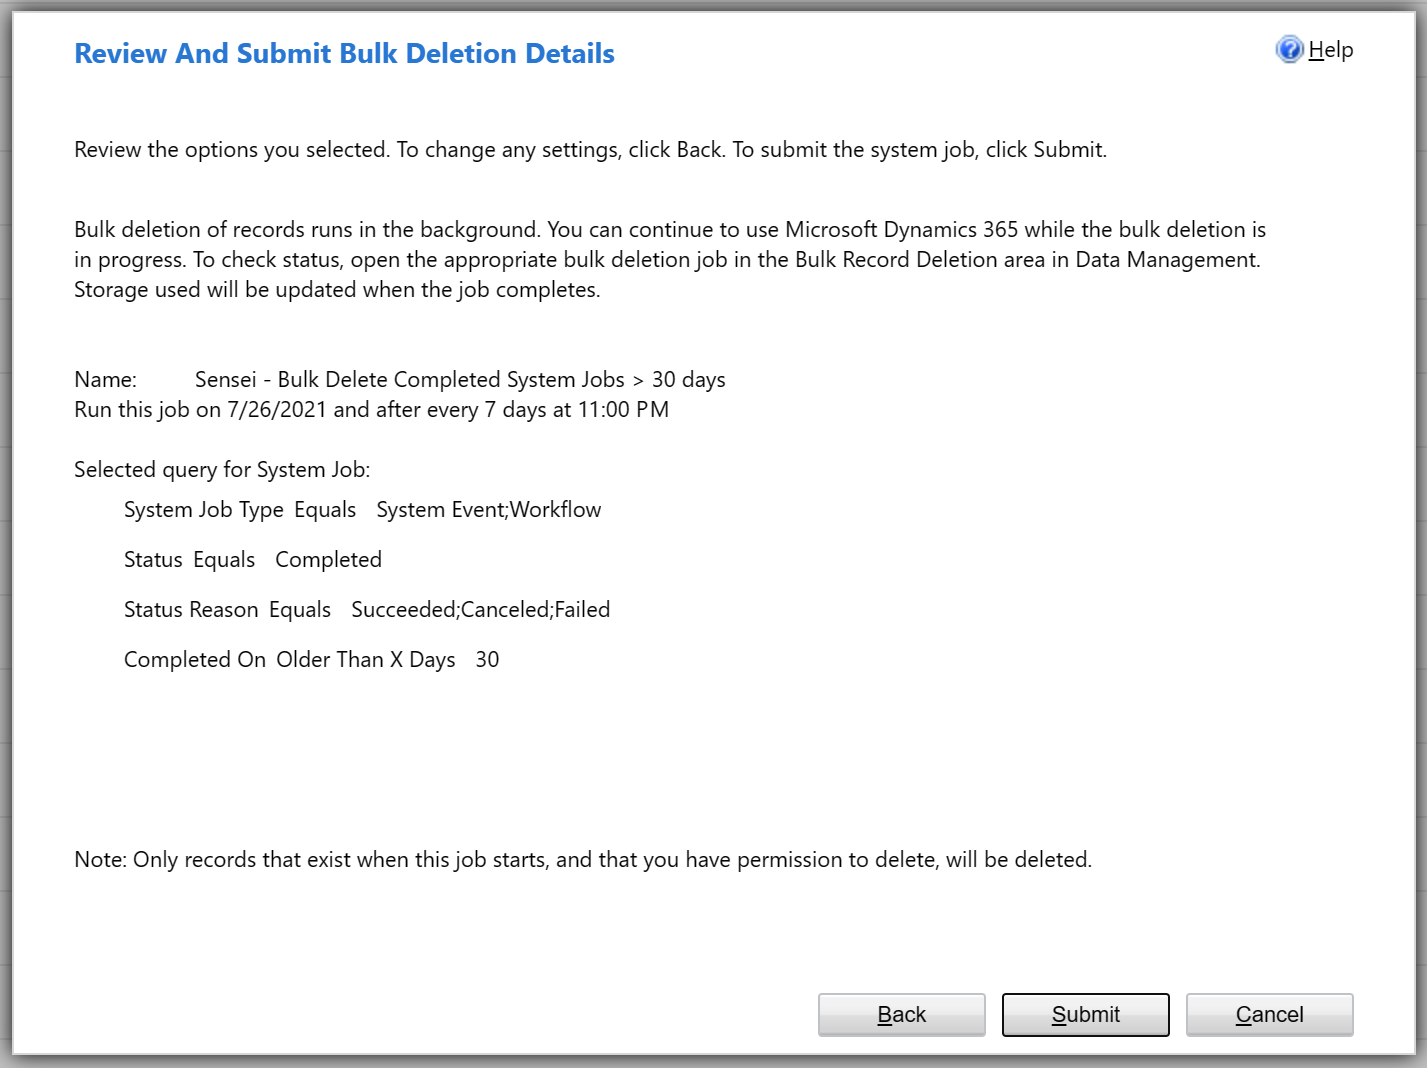 Image shows the review and submit bulk deletion details dialog